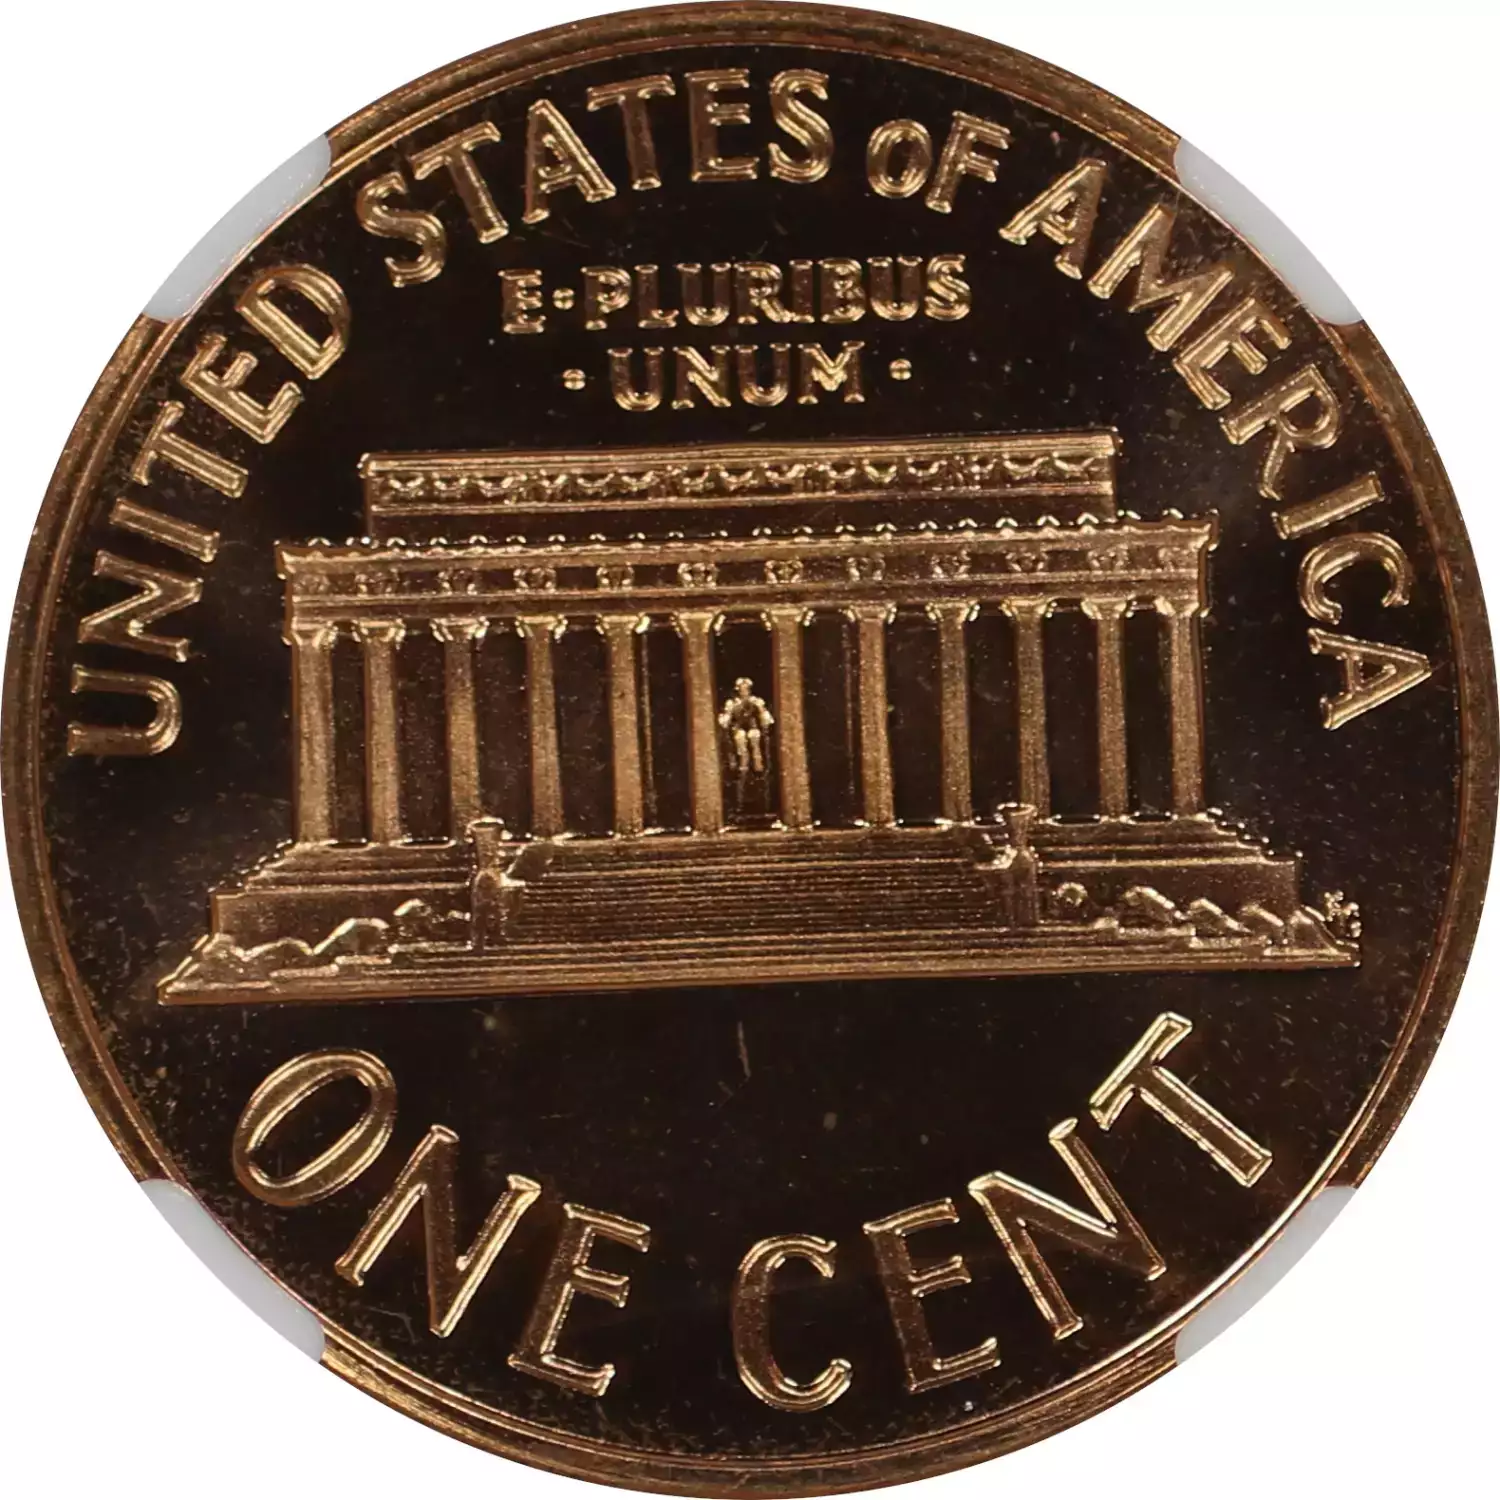 1964 PROOF LINCOLN MEMORIAL CENT PENNY 1C NGC CERTIFIED PF 68 RD (3)